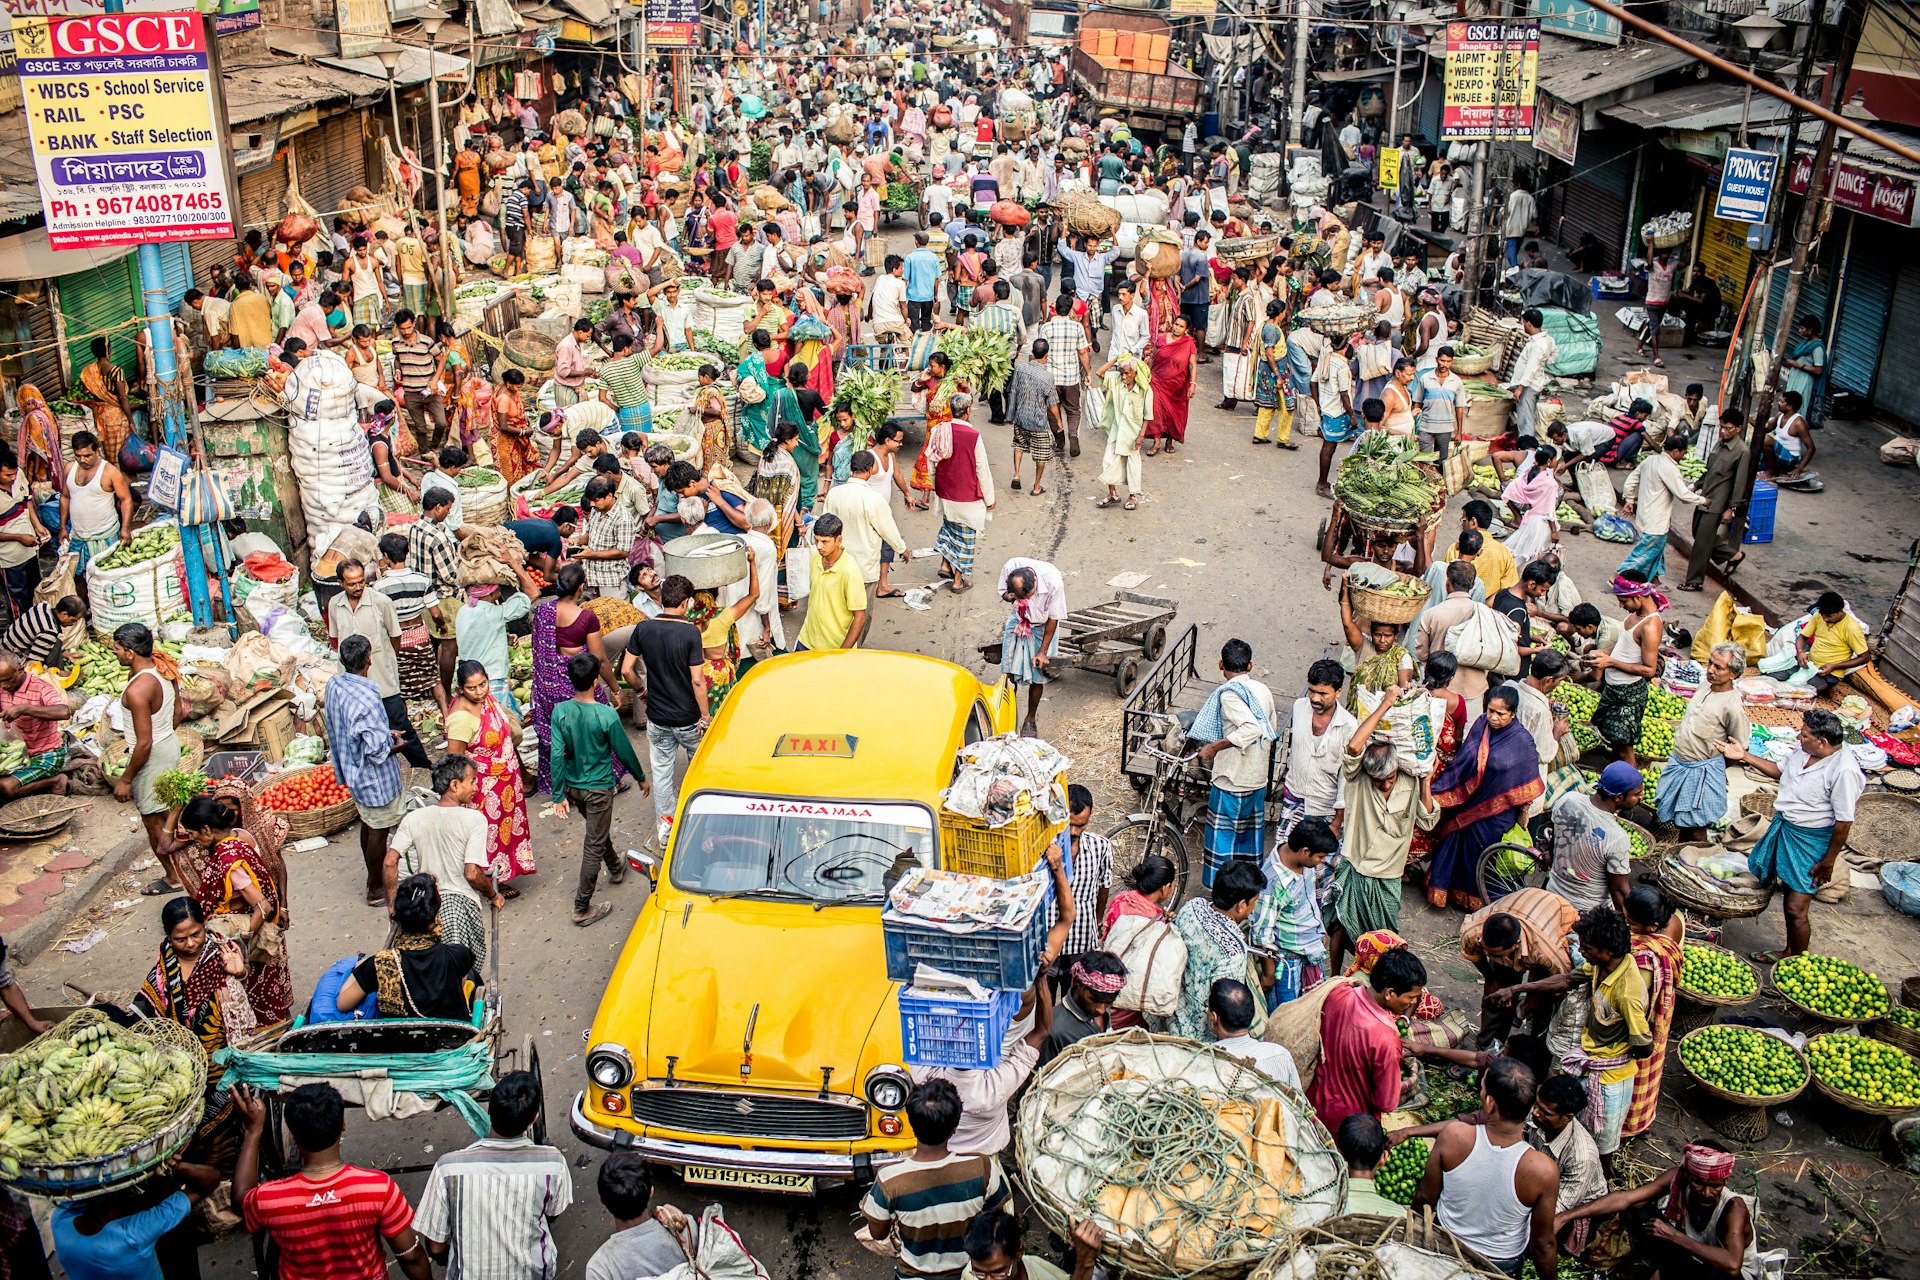 Busy scenes at one of Kolkata's largest food markets © Gavin Quirke / Getty Images